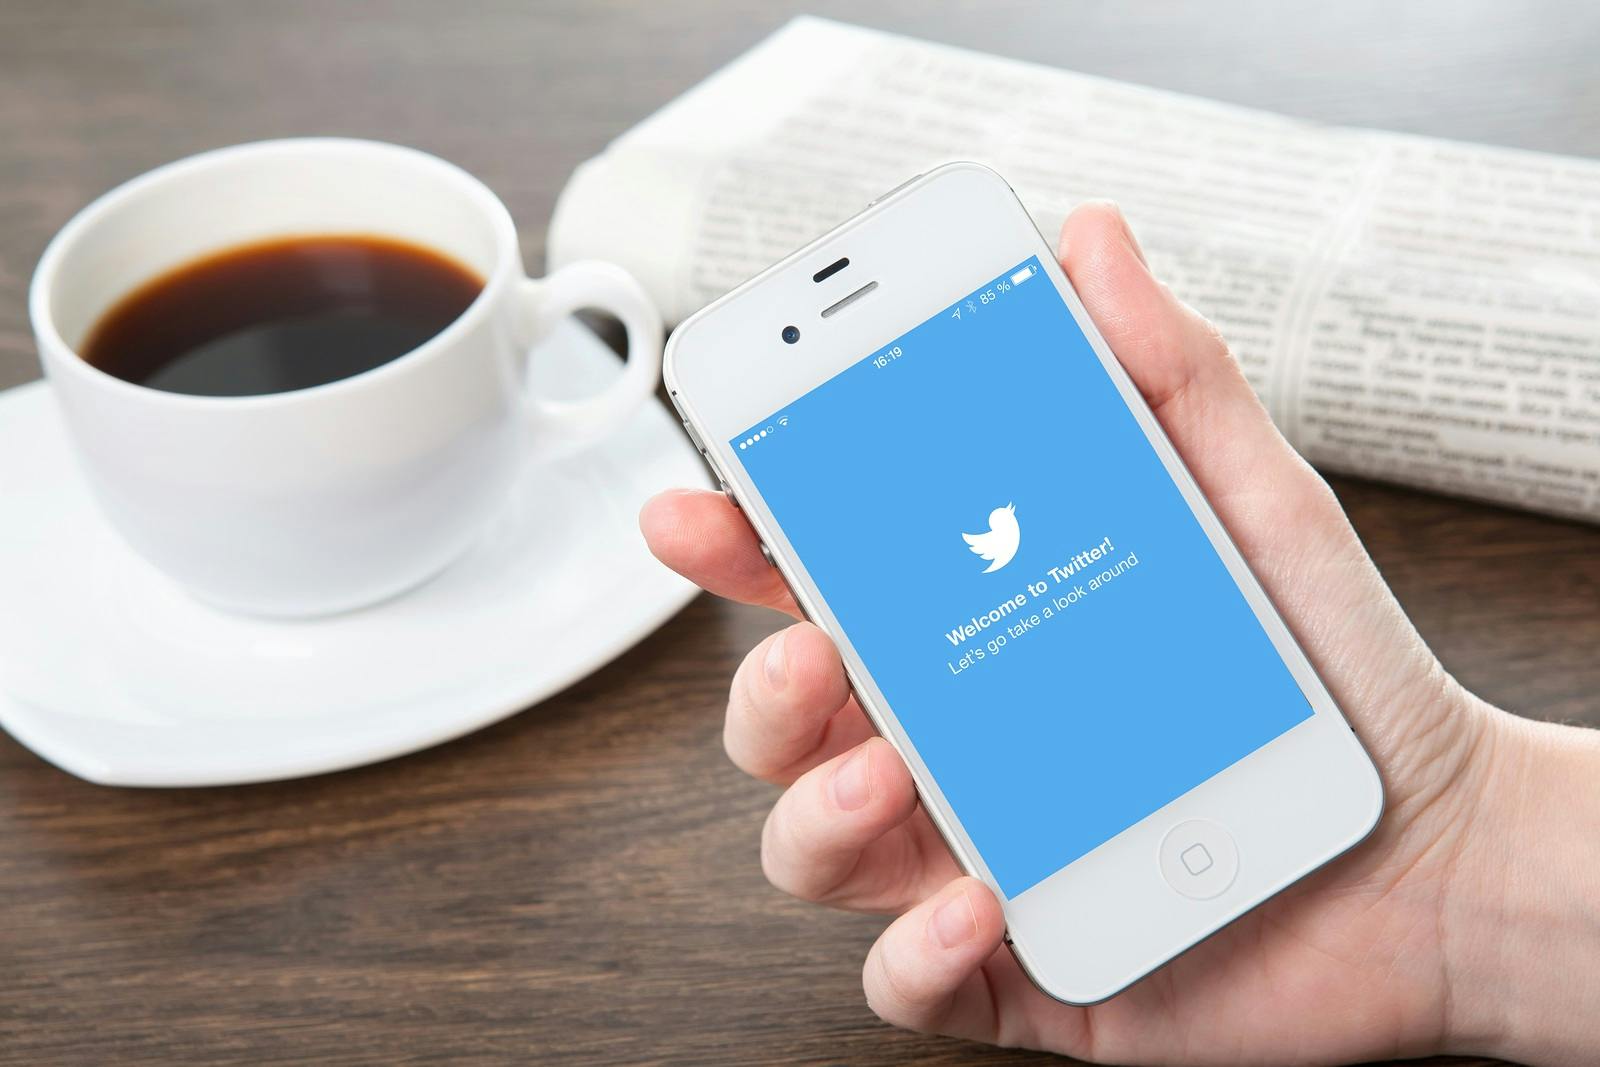 Engage with Twitter’s new app